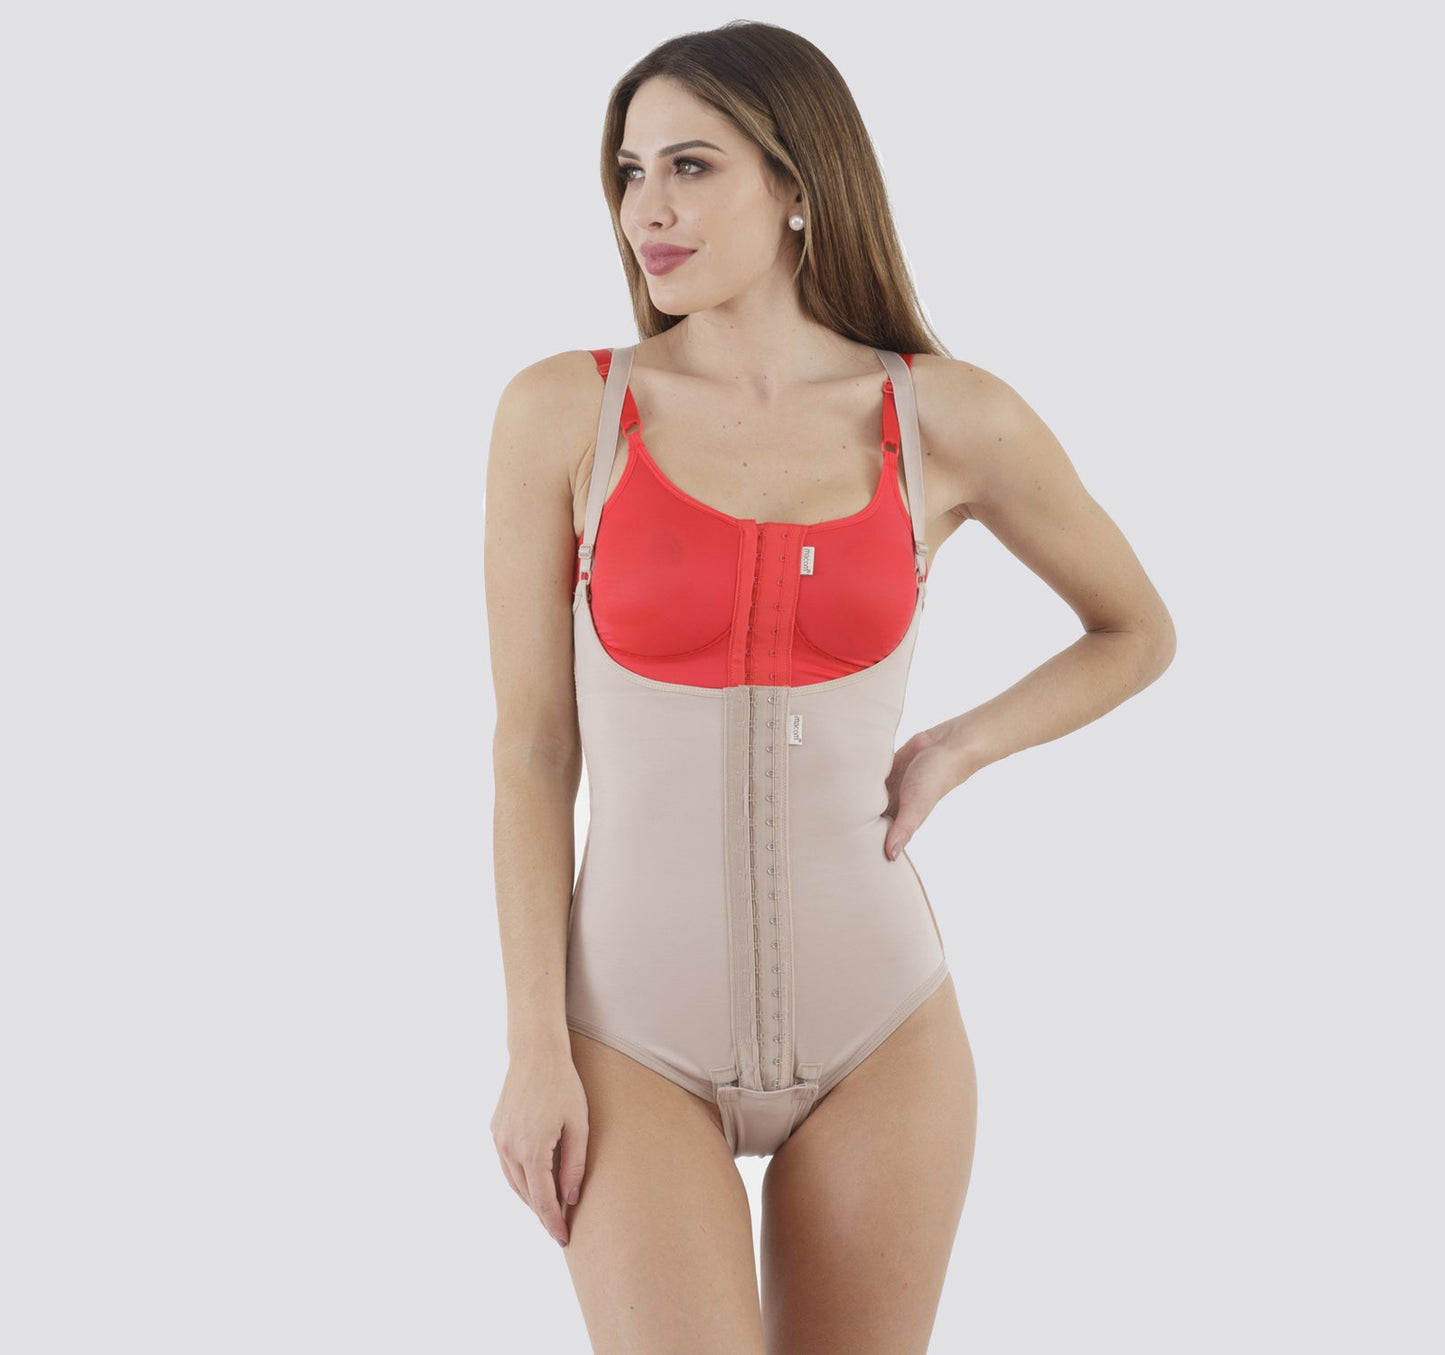 Bbl Fajas Colombianas 4 Kinds Of Post Surgery Colombian Reductive Girdles Tummy  Control Fajas Slimming Corset Waist Shapewear